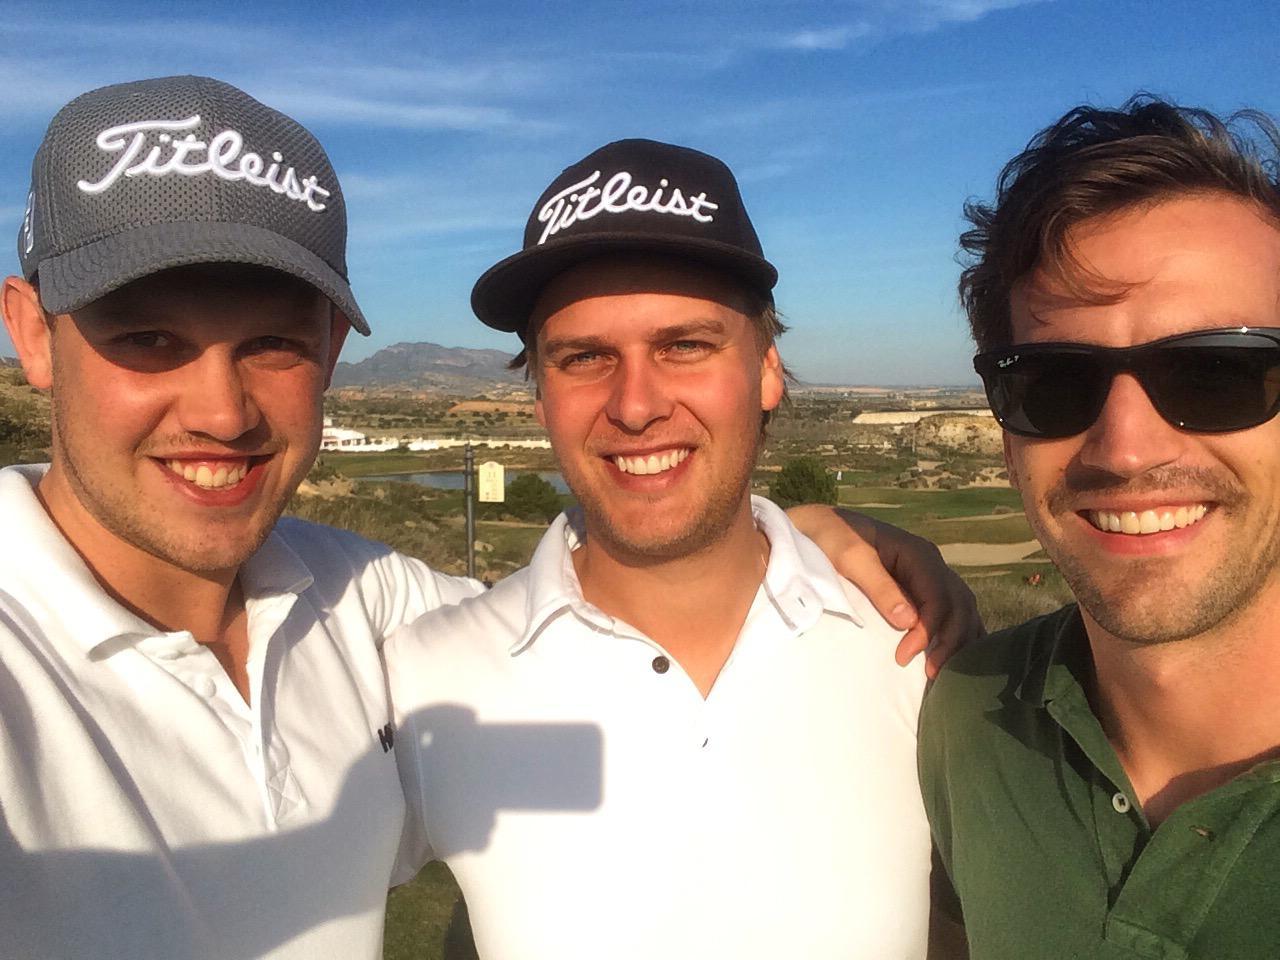 Felix (on the left) with his golf buddies enjoying a round of golf.